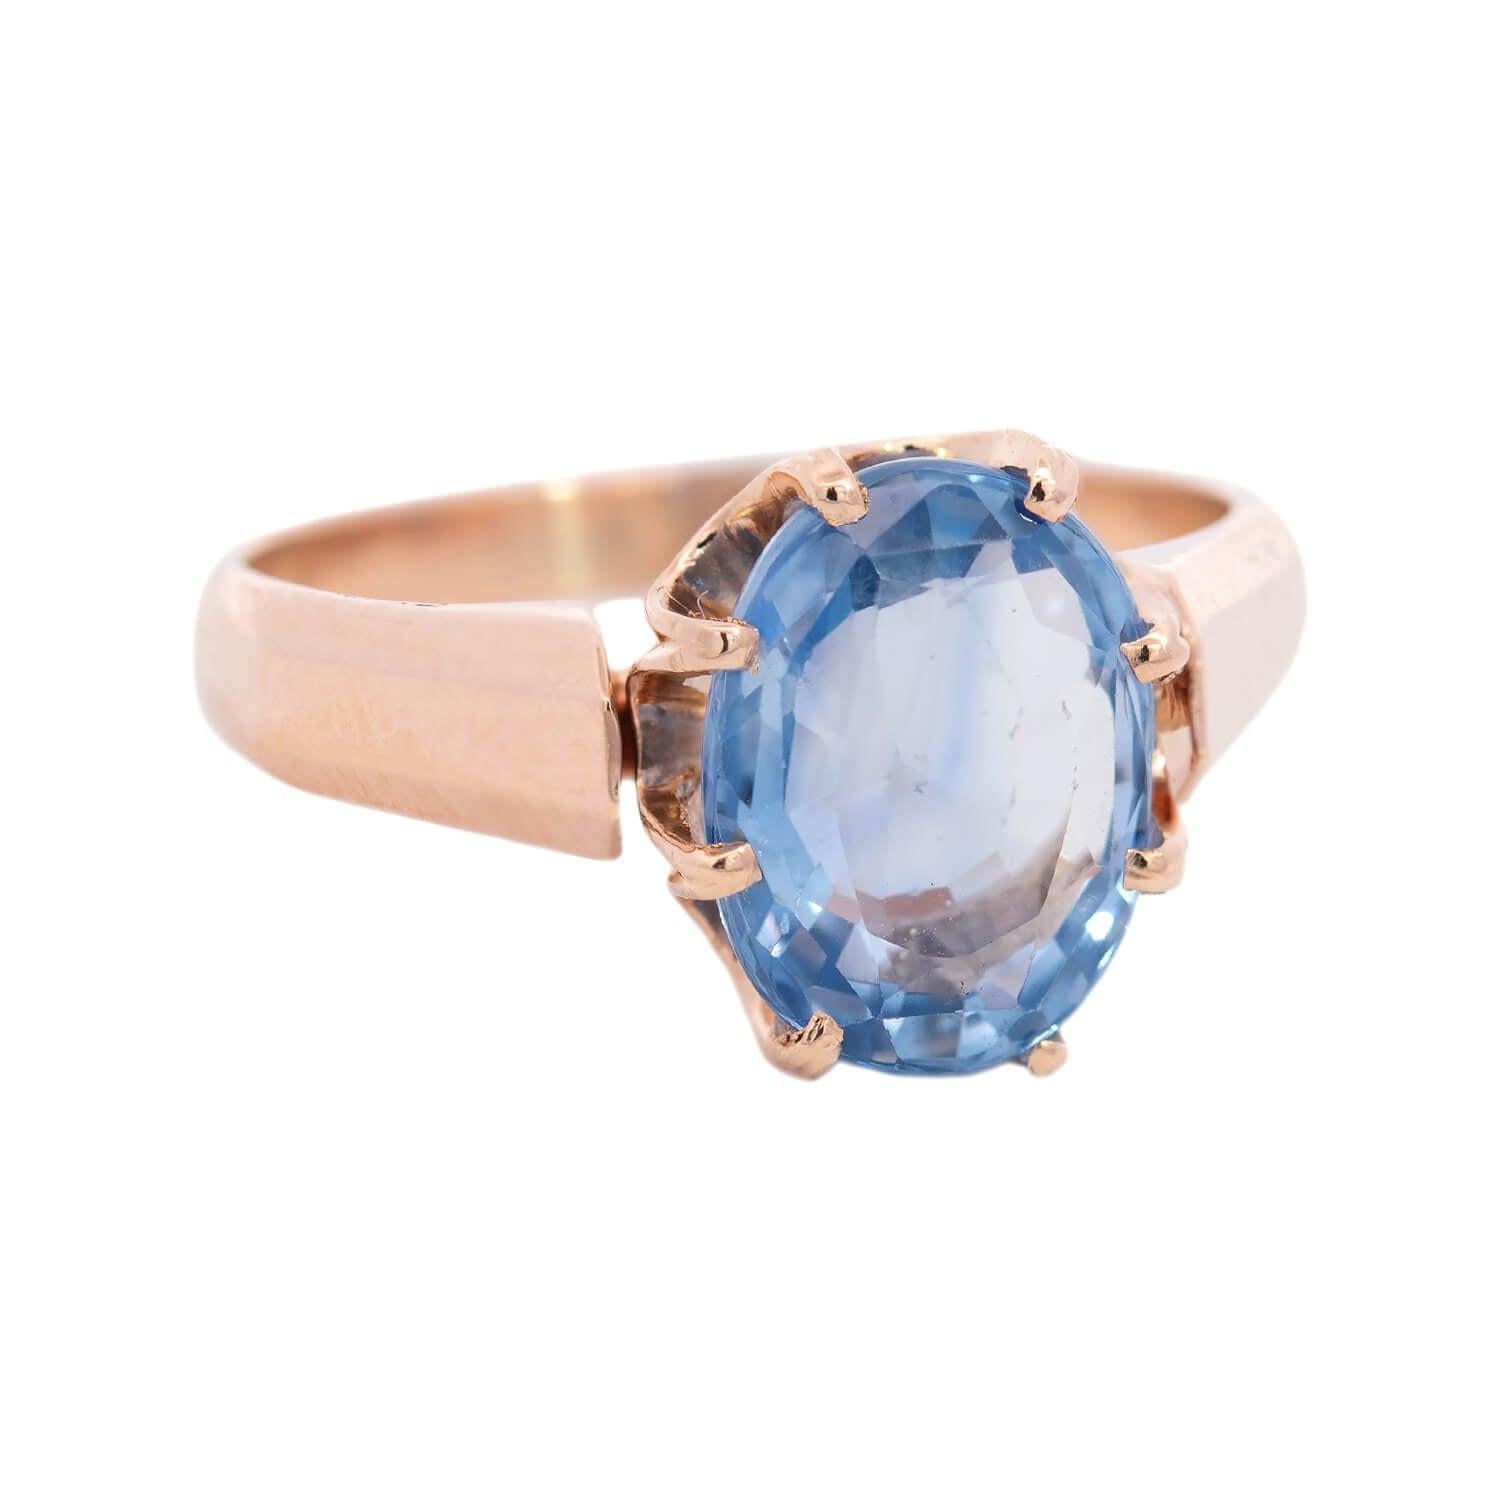 An outstanding sapphire ring from the Victorian (ca1880) era! This breathtaking 14k rosy yellow gold ring has a beautiful eight-prong open mounting. The oval cut sapphire has a weight of 3.34cts and boasts a gorgeous pale lavender-blue tone with